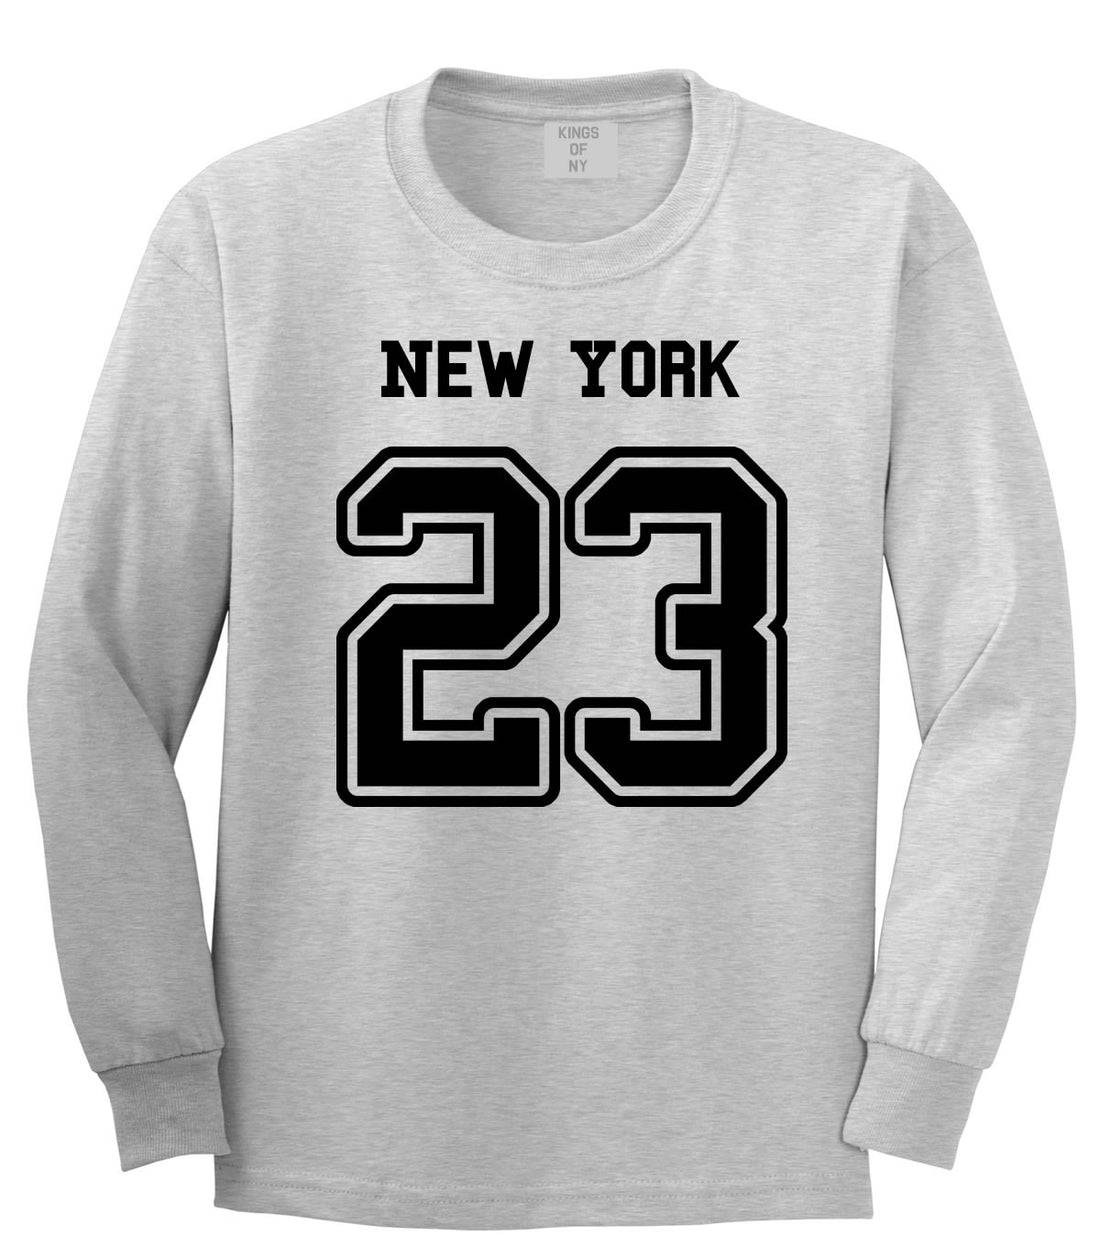 Sport Style New York 23 Team State Jersey Long Sleeve T-Shirt By Kings Of NY